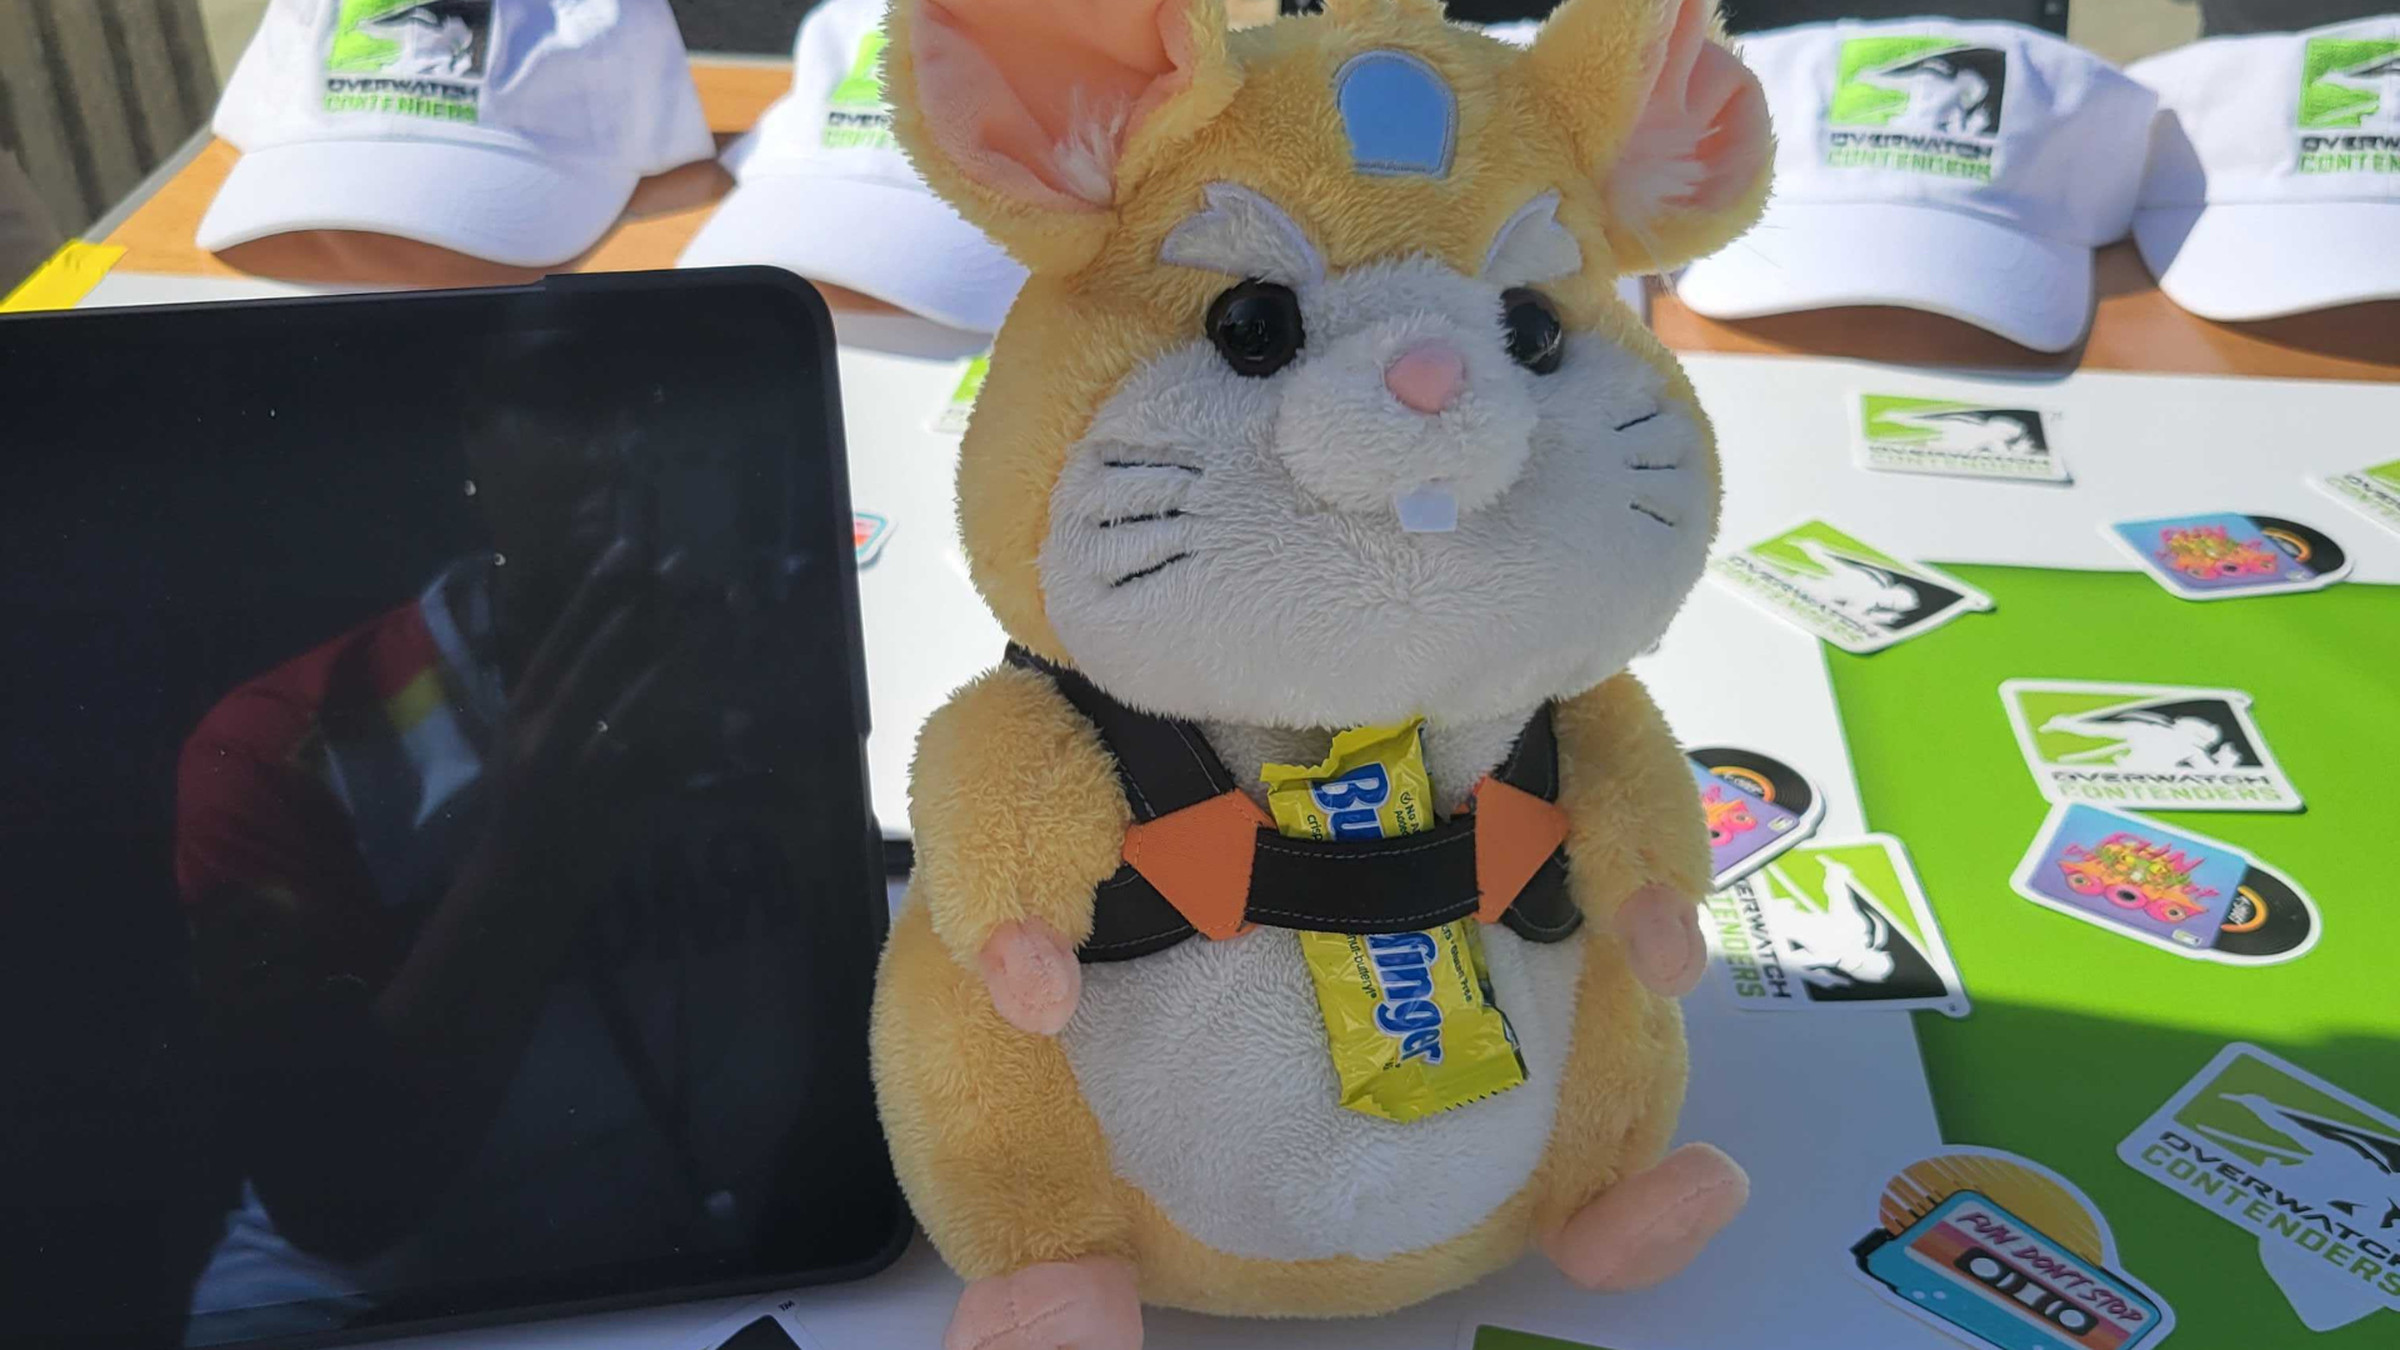 Photo of a stuffed hamster toy representing the Overwatch character Wrecking Ball with a fun-sized Butterfinger strapped to it.